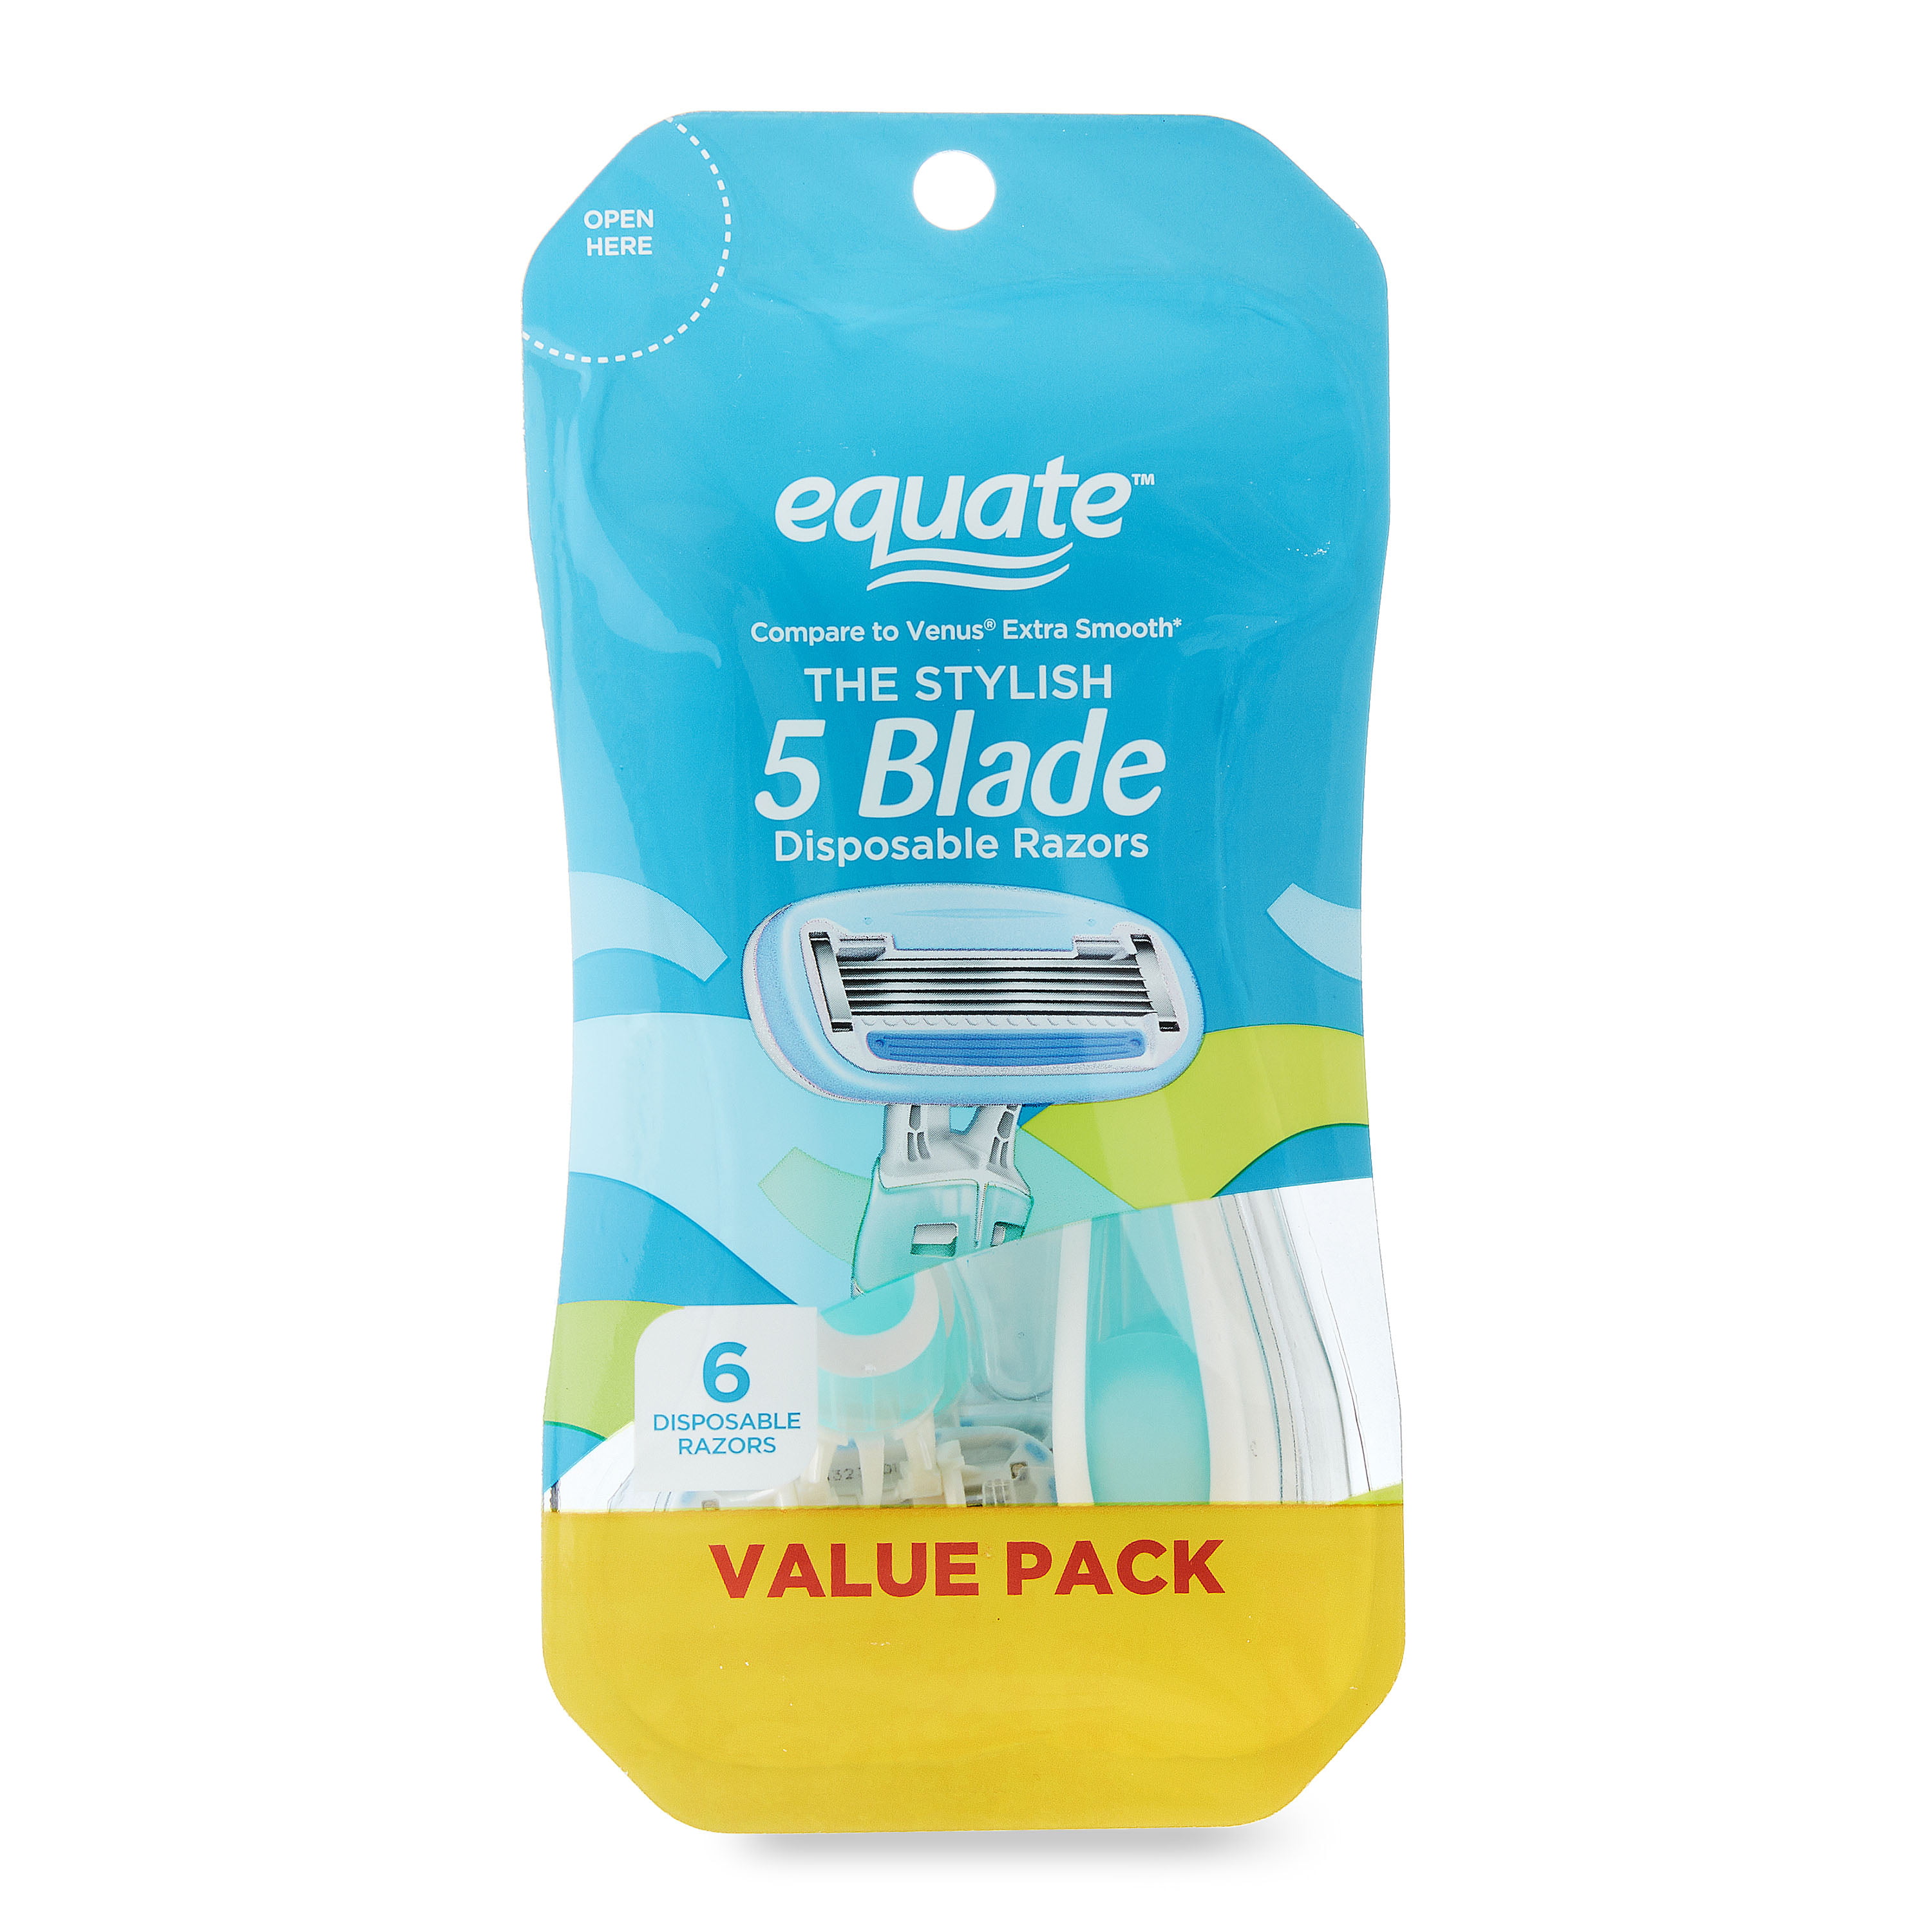 Equate Women's 5 Blade Disposable Razors, 6 Count